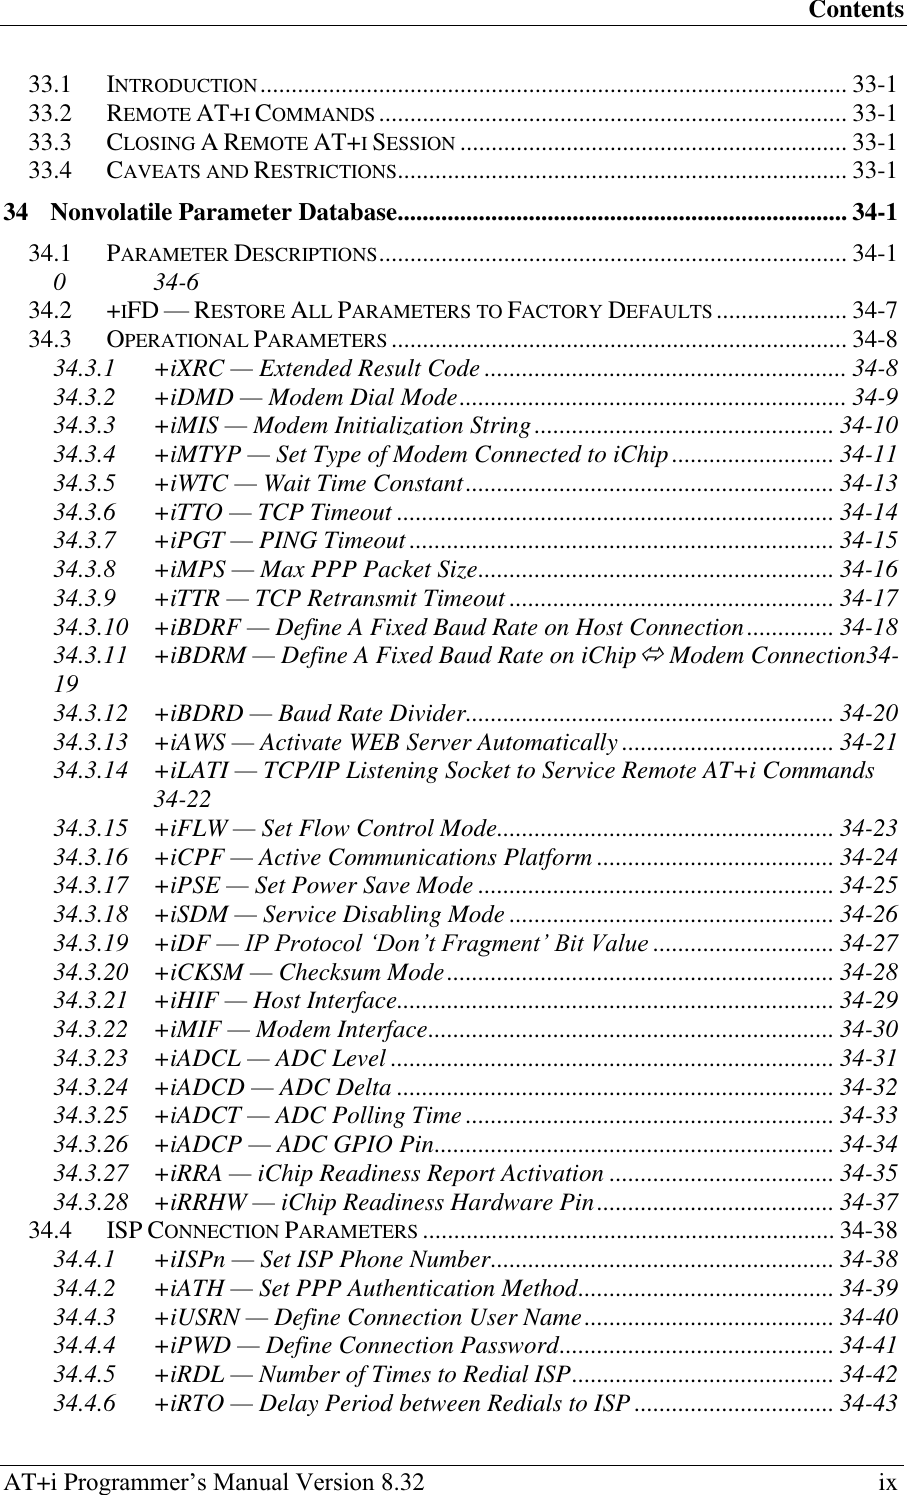 Contents AT+i Programmer‘s Manual Version 8.32  ix 33.1 INTRODUCTION .............................................................................................. 33-1 33.2 REMOTE AT+I COMMANDS ........................................................................... 33-1 33.3 CLOSING A REMOTE AT+I SESSION .............................................................. 33-1 33.4 CAVEATS AND RESTRICTIONS ........................................................................ 33-1 34 Nonvolatile Parameter Database........................................................................ 34-1 34.1 PARAMETER DESCRIPTIONS ........................................................................... 34-1 0  34-6 34.2 +IFD — RESTORE ALL PARAMETERS TO FACTORY DEFAULTS ..................... 34-7 34.3 OPERATIONAL PARAMETERS ......................................................................... 34-8 34.3.1 +iXRC — Extended Result Code .......................................................... 34-8 34.3.2 +iDMD — Modem Dial Mode .............................................................. 34-9 34.3.3 +iMIS — Modem Initialization String ................................................ 34-10 34.3.4 +iMTYP — Set Type of Modem Connected to iChip .......................... 34-11 34.3.5 +iWTC — Wait Time Constant ........................................................... 34-13 34.3.6 +iTTO — TCP Timeout ...................................................................... 34-14 34.3.7 +iPGT — PING Timeout .................................................................... 34-15 34.3.8 +iMPS — Max PPP Packet Size ......................................................... 34-16 34.3.9 +iTTR — TCP Retransmit Timeout .................................................... 34-17 34.3.10 +iBDRF — Define A Fixed Baud Rate on Host Connection .............. 34-18 34.3.11 +iBDRM — Define A Fixed Baud Rate on iChip Modem Connection34-19 34.3.12 +iBDRD — Baud Rate Divider ........................................................... 34-20 34.3.13 +iAWS — Activate WEB Server Automatically .................................. 34-21 34.3.14 +iLATI — TCP/IP Listening Socket to Service Remote AT+i Commands  34-22 34.3.15 +iFLW — Set Flow Control Mode ...................................................... 34-23 34.3.16 +iCPF — Active Communications Platform ...................................... 34-24 34.3.17 +iPSE — Set Power Save Mode ......................................................... 34-25 34.3.18 +iSDM — Service Disabling Mode .................................................... 34-26 34.3.19 +iDF — IP Protocol ‘Don’t Fragment’ Bit Value ............................. 34-27 34.3.20 +iCKSM — Checksum Mode .............................................................. 34-28 34.3.21 +iHIF — Host Interface...................................................................... 34-29 34.3.22 +iMIF — Modem Interface ................................................................. 34-30 34.3.23 +iADCL — ADC Level ....................................................................... 34-31 34.3.24 +iADCD — ADC Delta ...................................................................... 34-32 34.3.25 +iADCT — ADC Polling Time ........................................................... 34-33 34.3.26 +iADCP — ADC GPIO Pin ................................................................ 34-34 34.3.27 +iRRA — iChip Readiness Report Activation .................................... 34-35 34.3.28 +iRRHW — iChip Readiness Hardware Pin ...................................... 34-37 34.4 ISP CONNECTION PARAMETERS .................................................................. 34-38 34.4.1 +iISPn — Set ISP Phone Number ....................................................... 34-38 34.4.2 +iATH — Set PPP Authentication Method ......................................... 34-39 34.4.3 +iUSRN — Define Connection User Name ........................................ 34-40 34.4.4 +iPWD — Define Connection Password ............................................ 34-41 34.4.5 +iRDL — Number of Times to Redial ISP .......................................... 34-42 34.4.6 +iRTO — Delay Period between Redials to ISP ................................ 34-43 